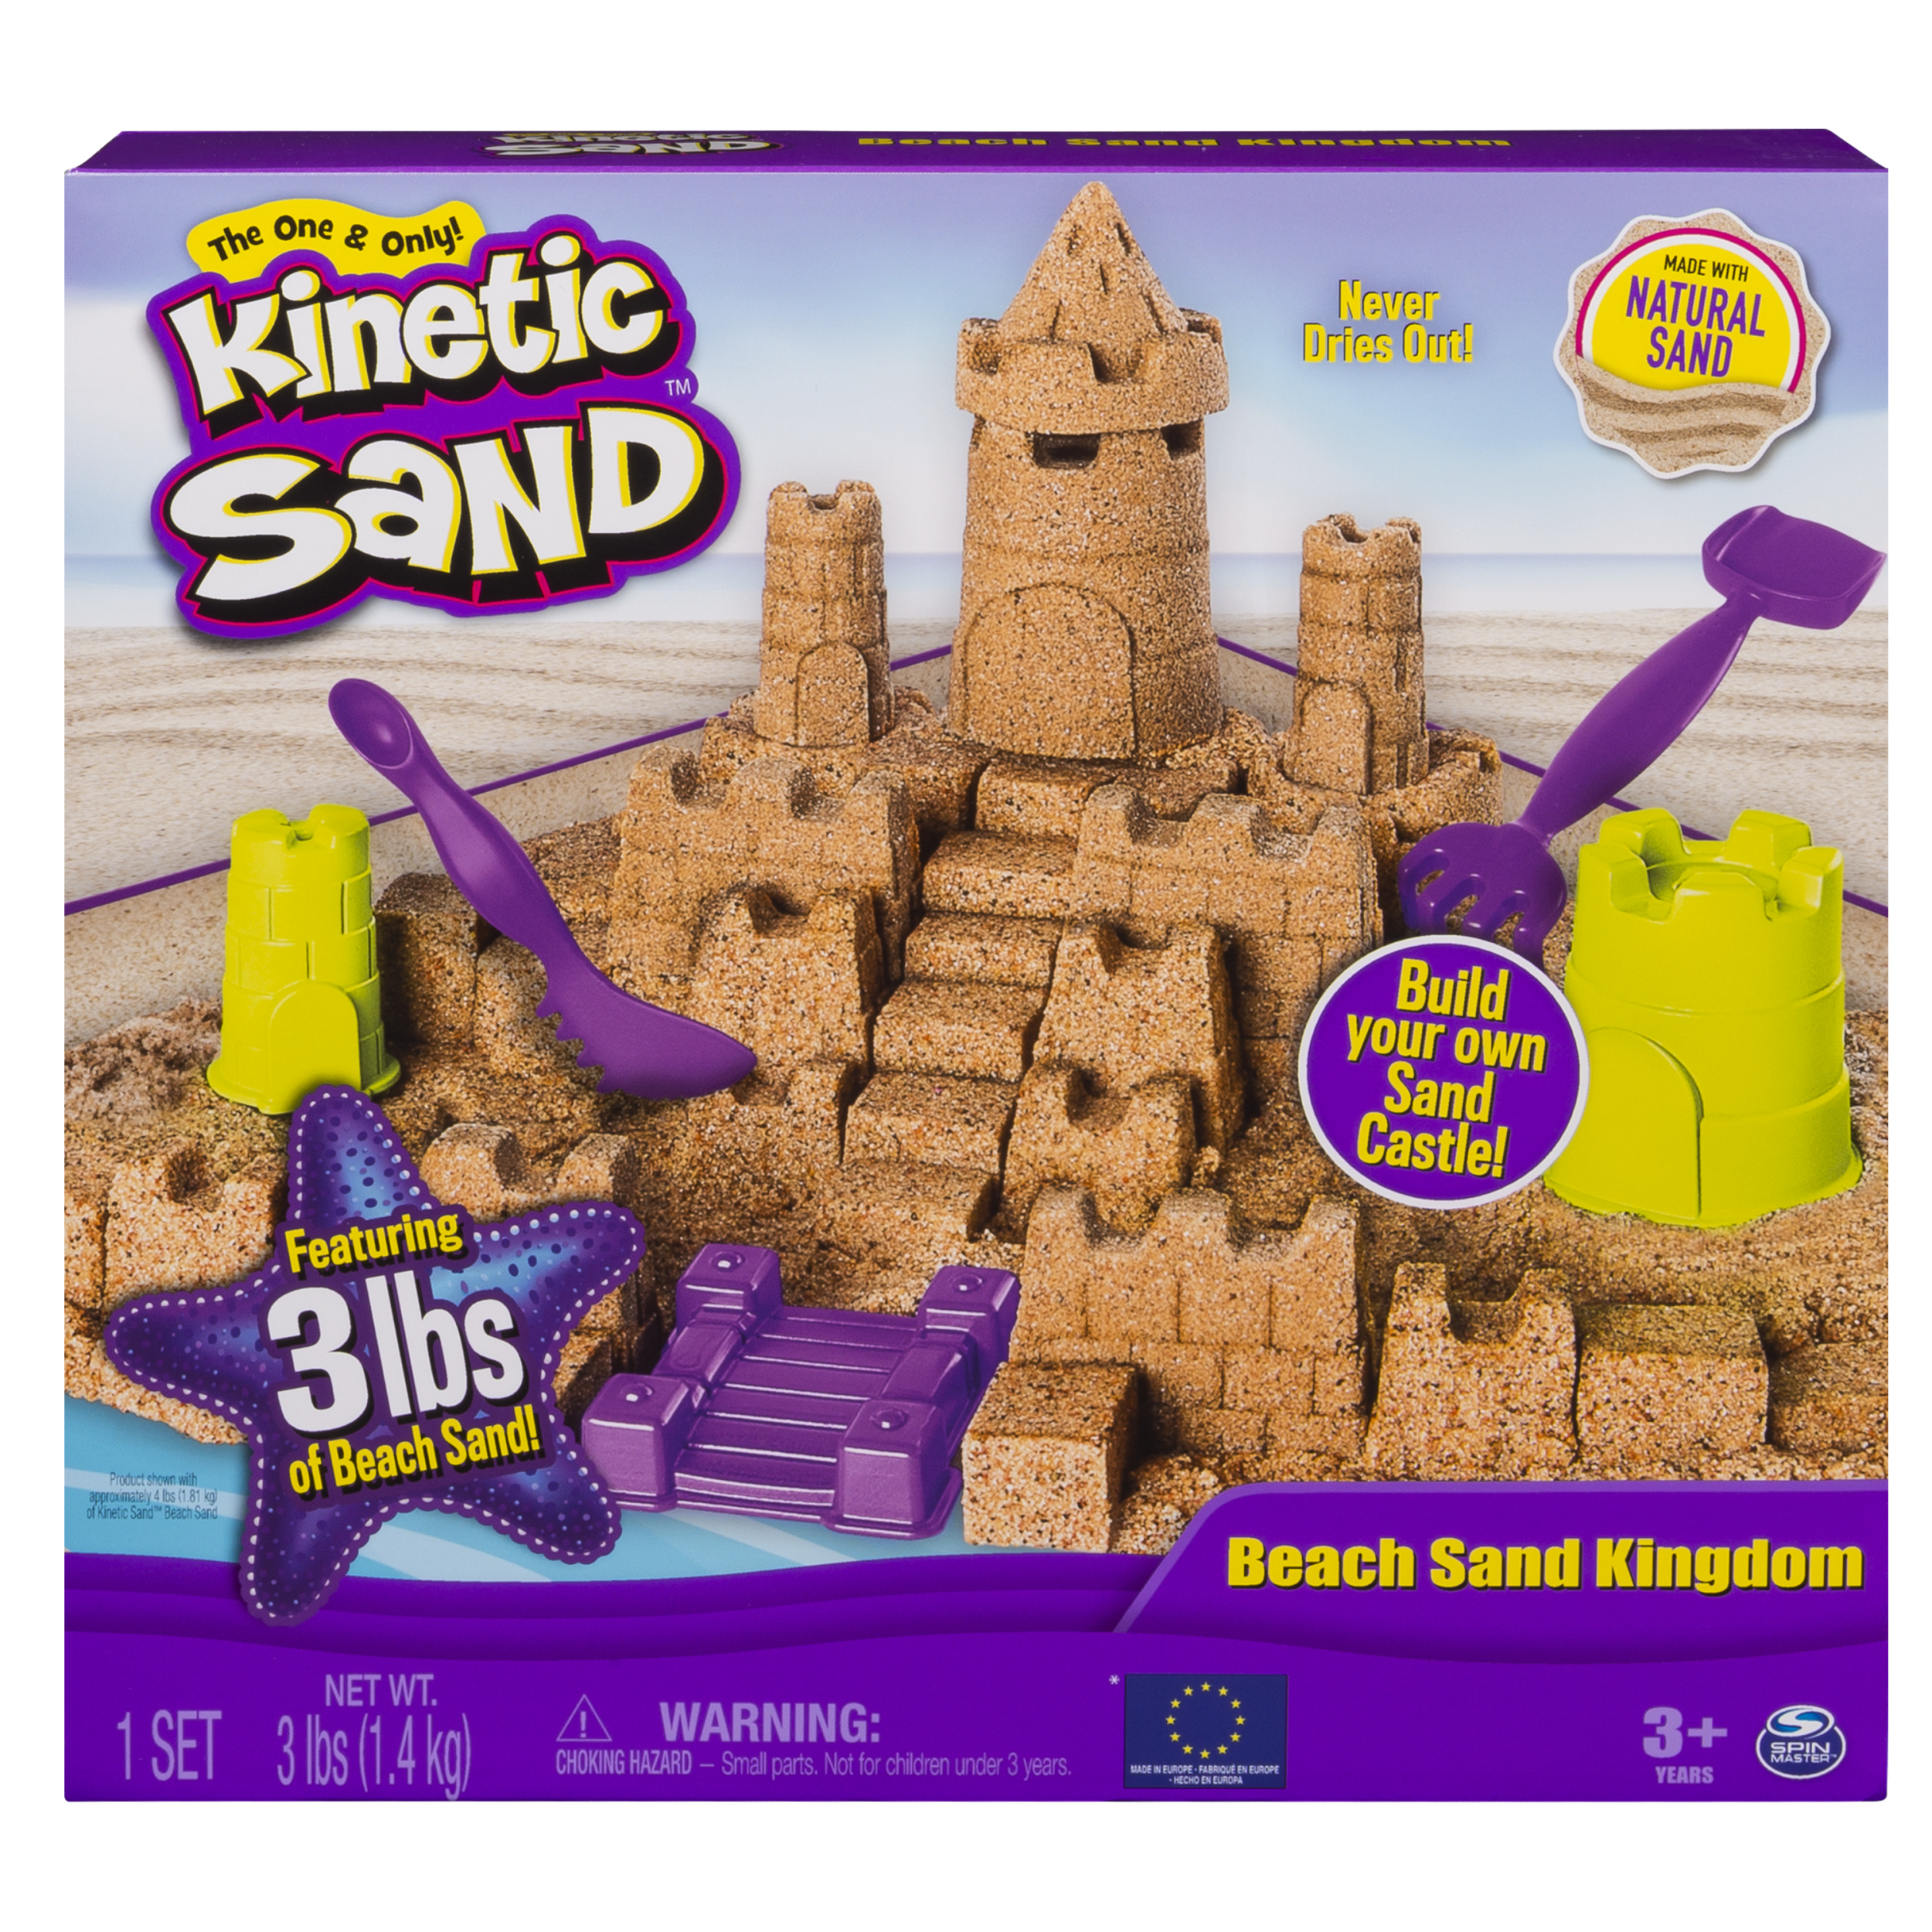 Spin Master Kinetic Sand Beach Sand Kingdom Playset with 3lbs of Beach Sand, for Ages 3 and Up